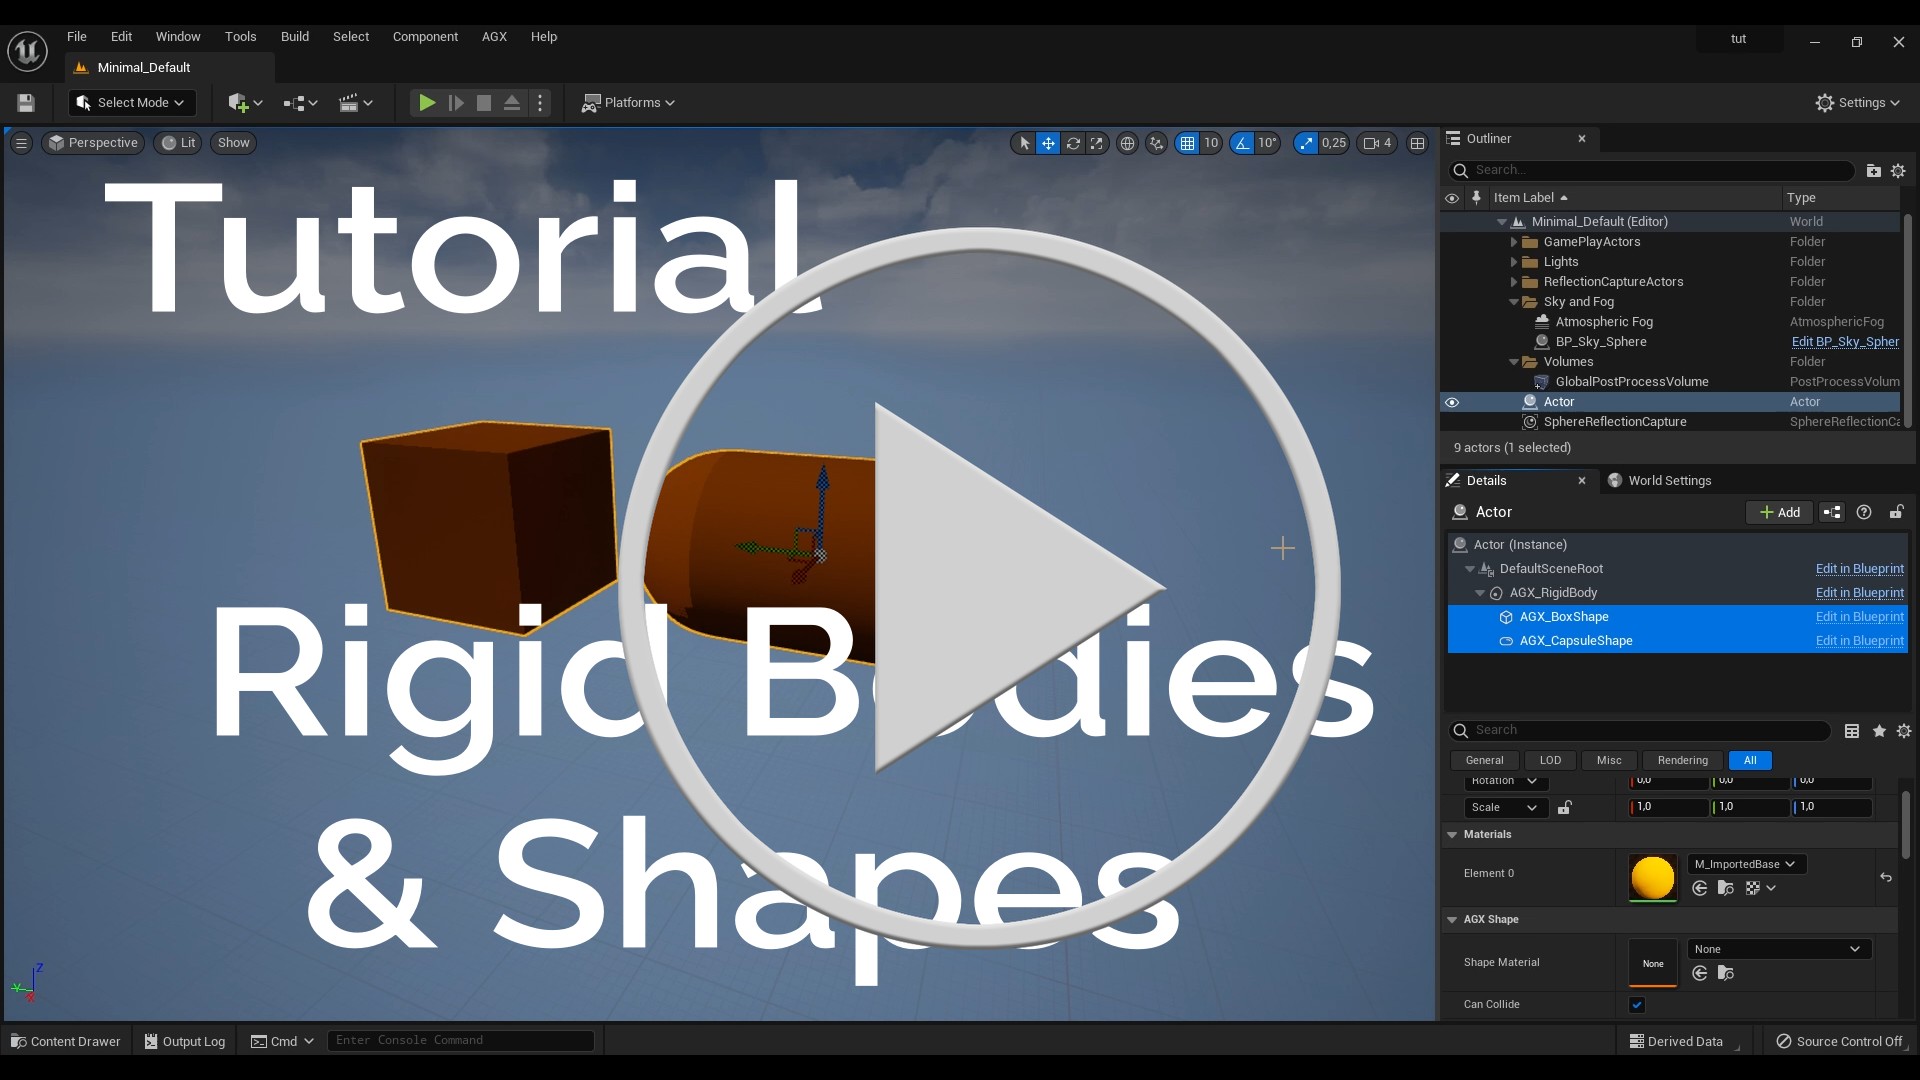 Video tutorial about Rigid Bodies and Shapes.